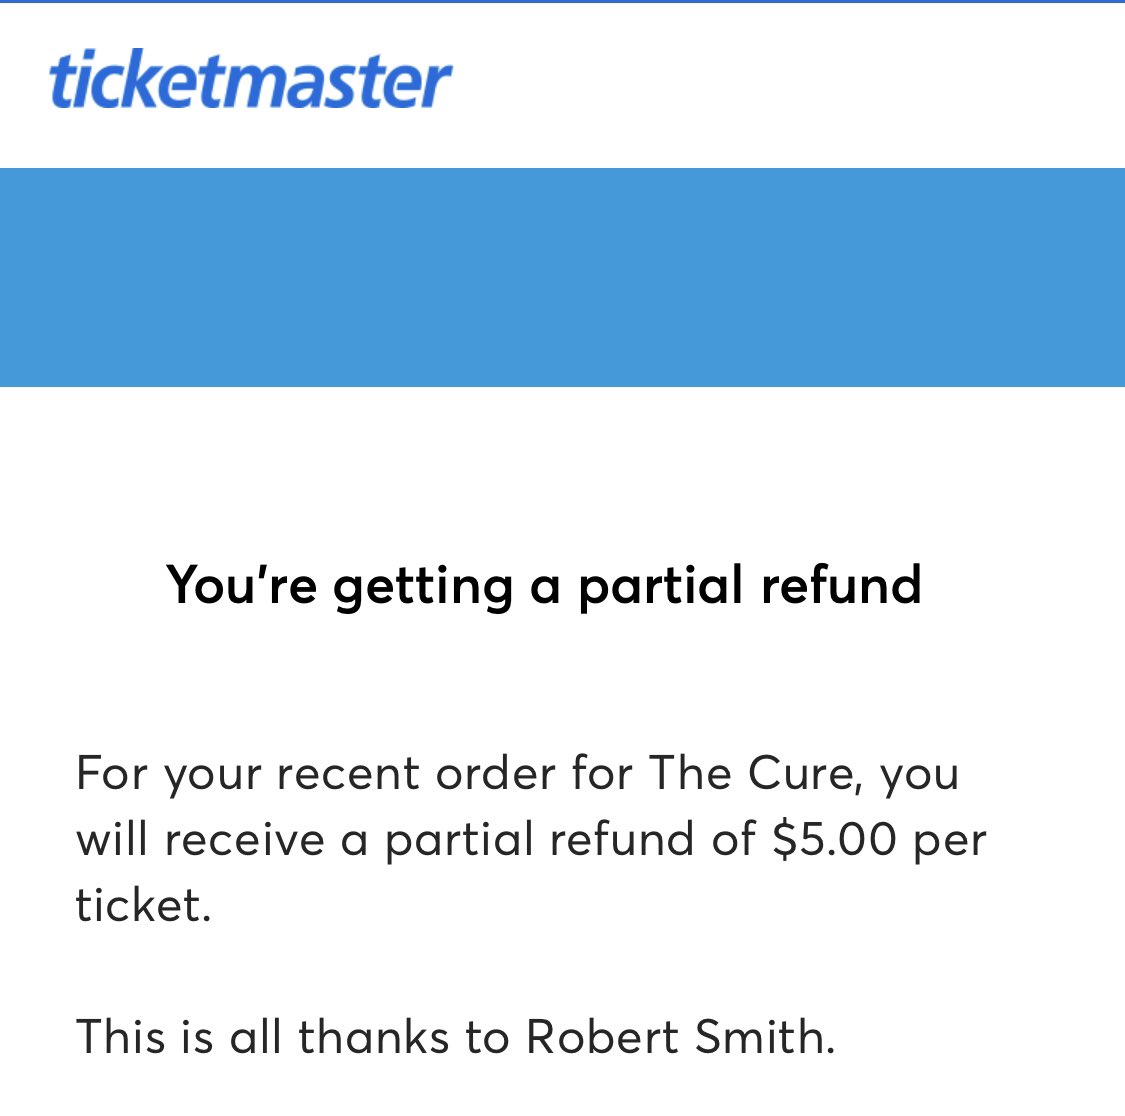 Look what I got from Ticketmaster!!!!
Thank you, @RobertSmith!

This may seem small to a lot of people, but every little bit counts. And frankly, making Ticketmaster obey is kinda sweet! 
#TheCureTour2023